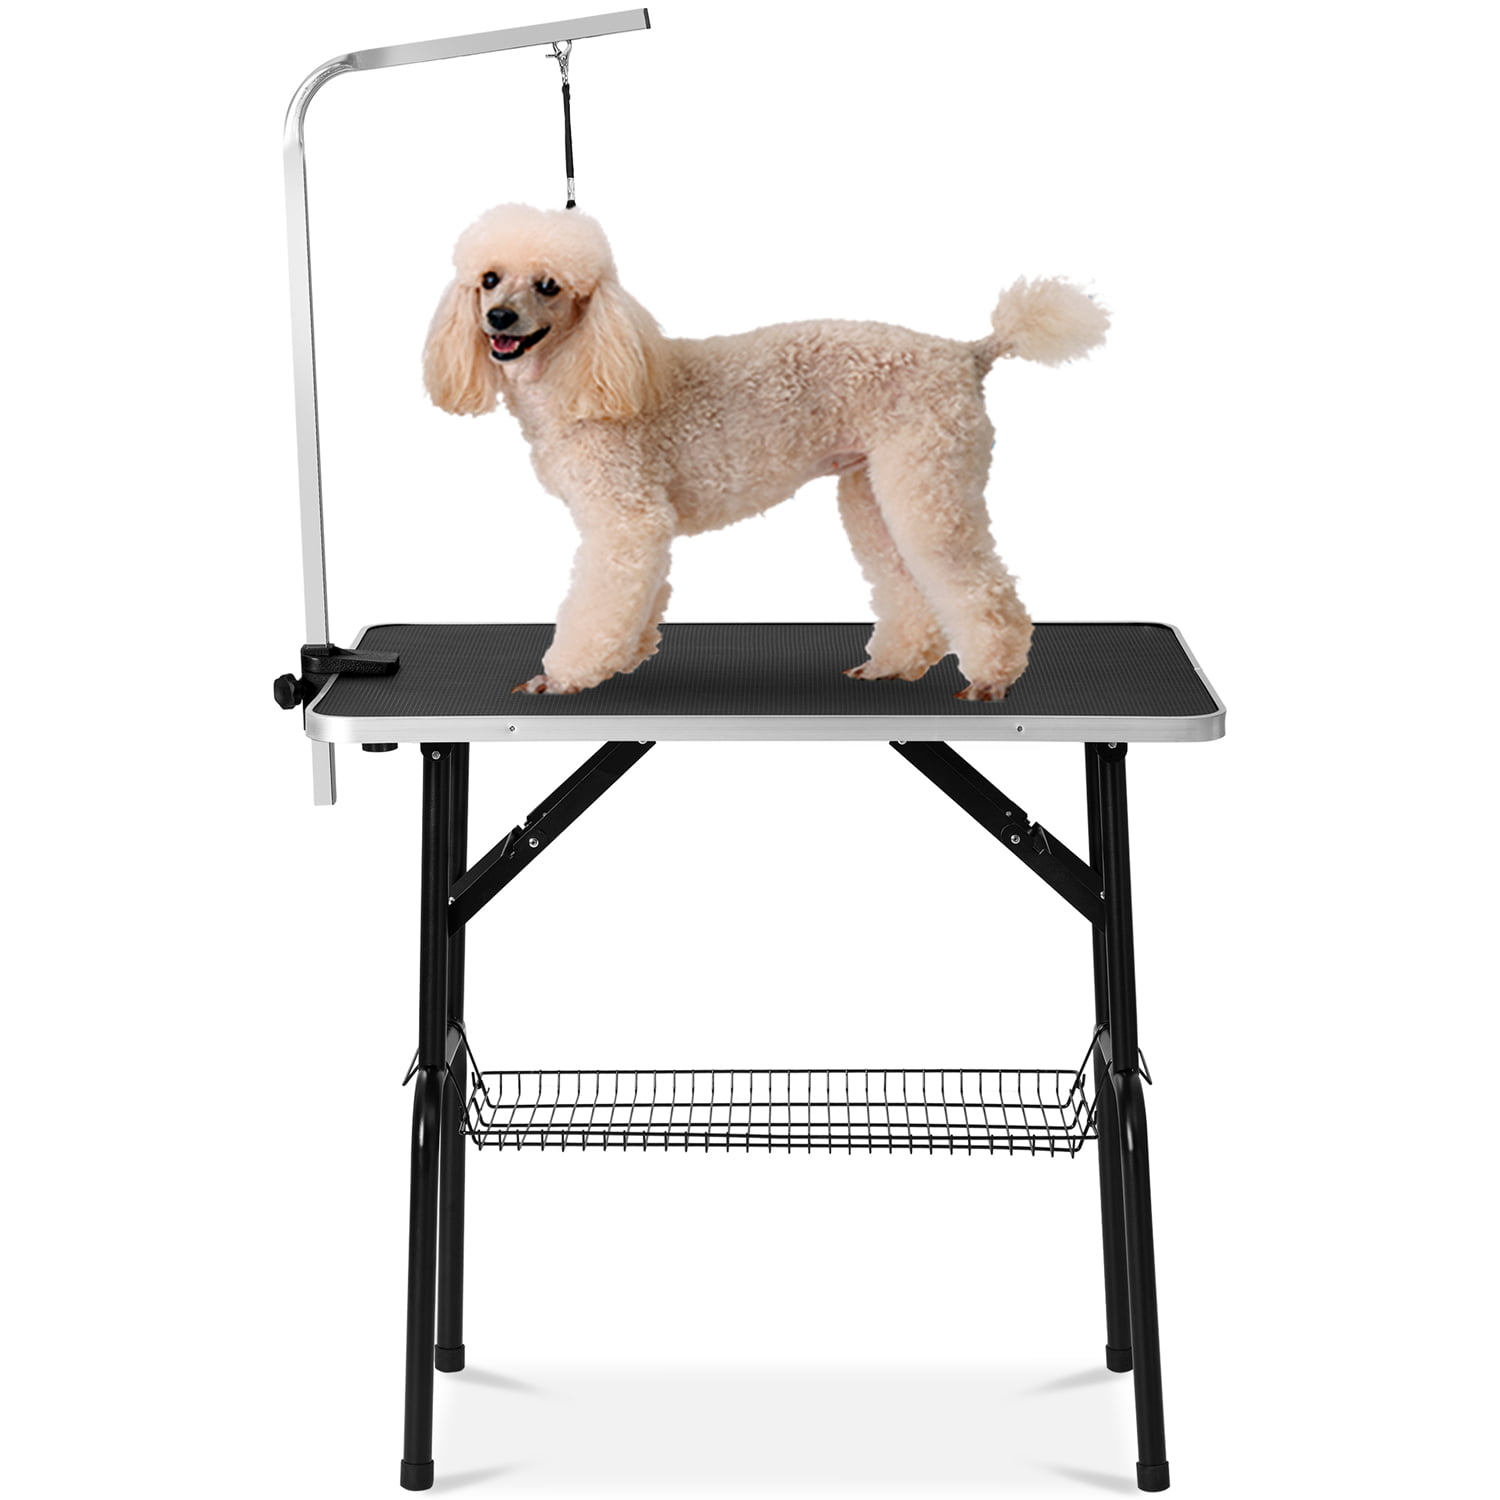 Best Restraint For Dog Grooming in the year 2023 The ultimate guide 